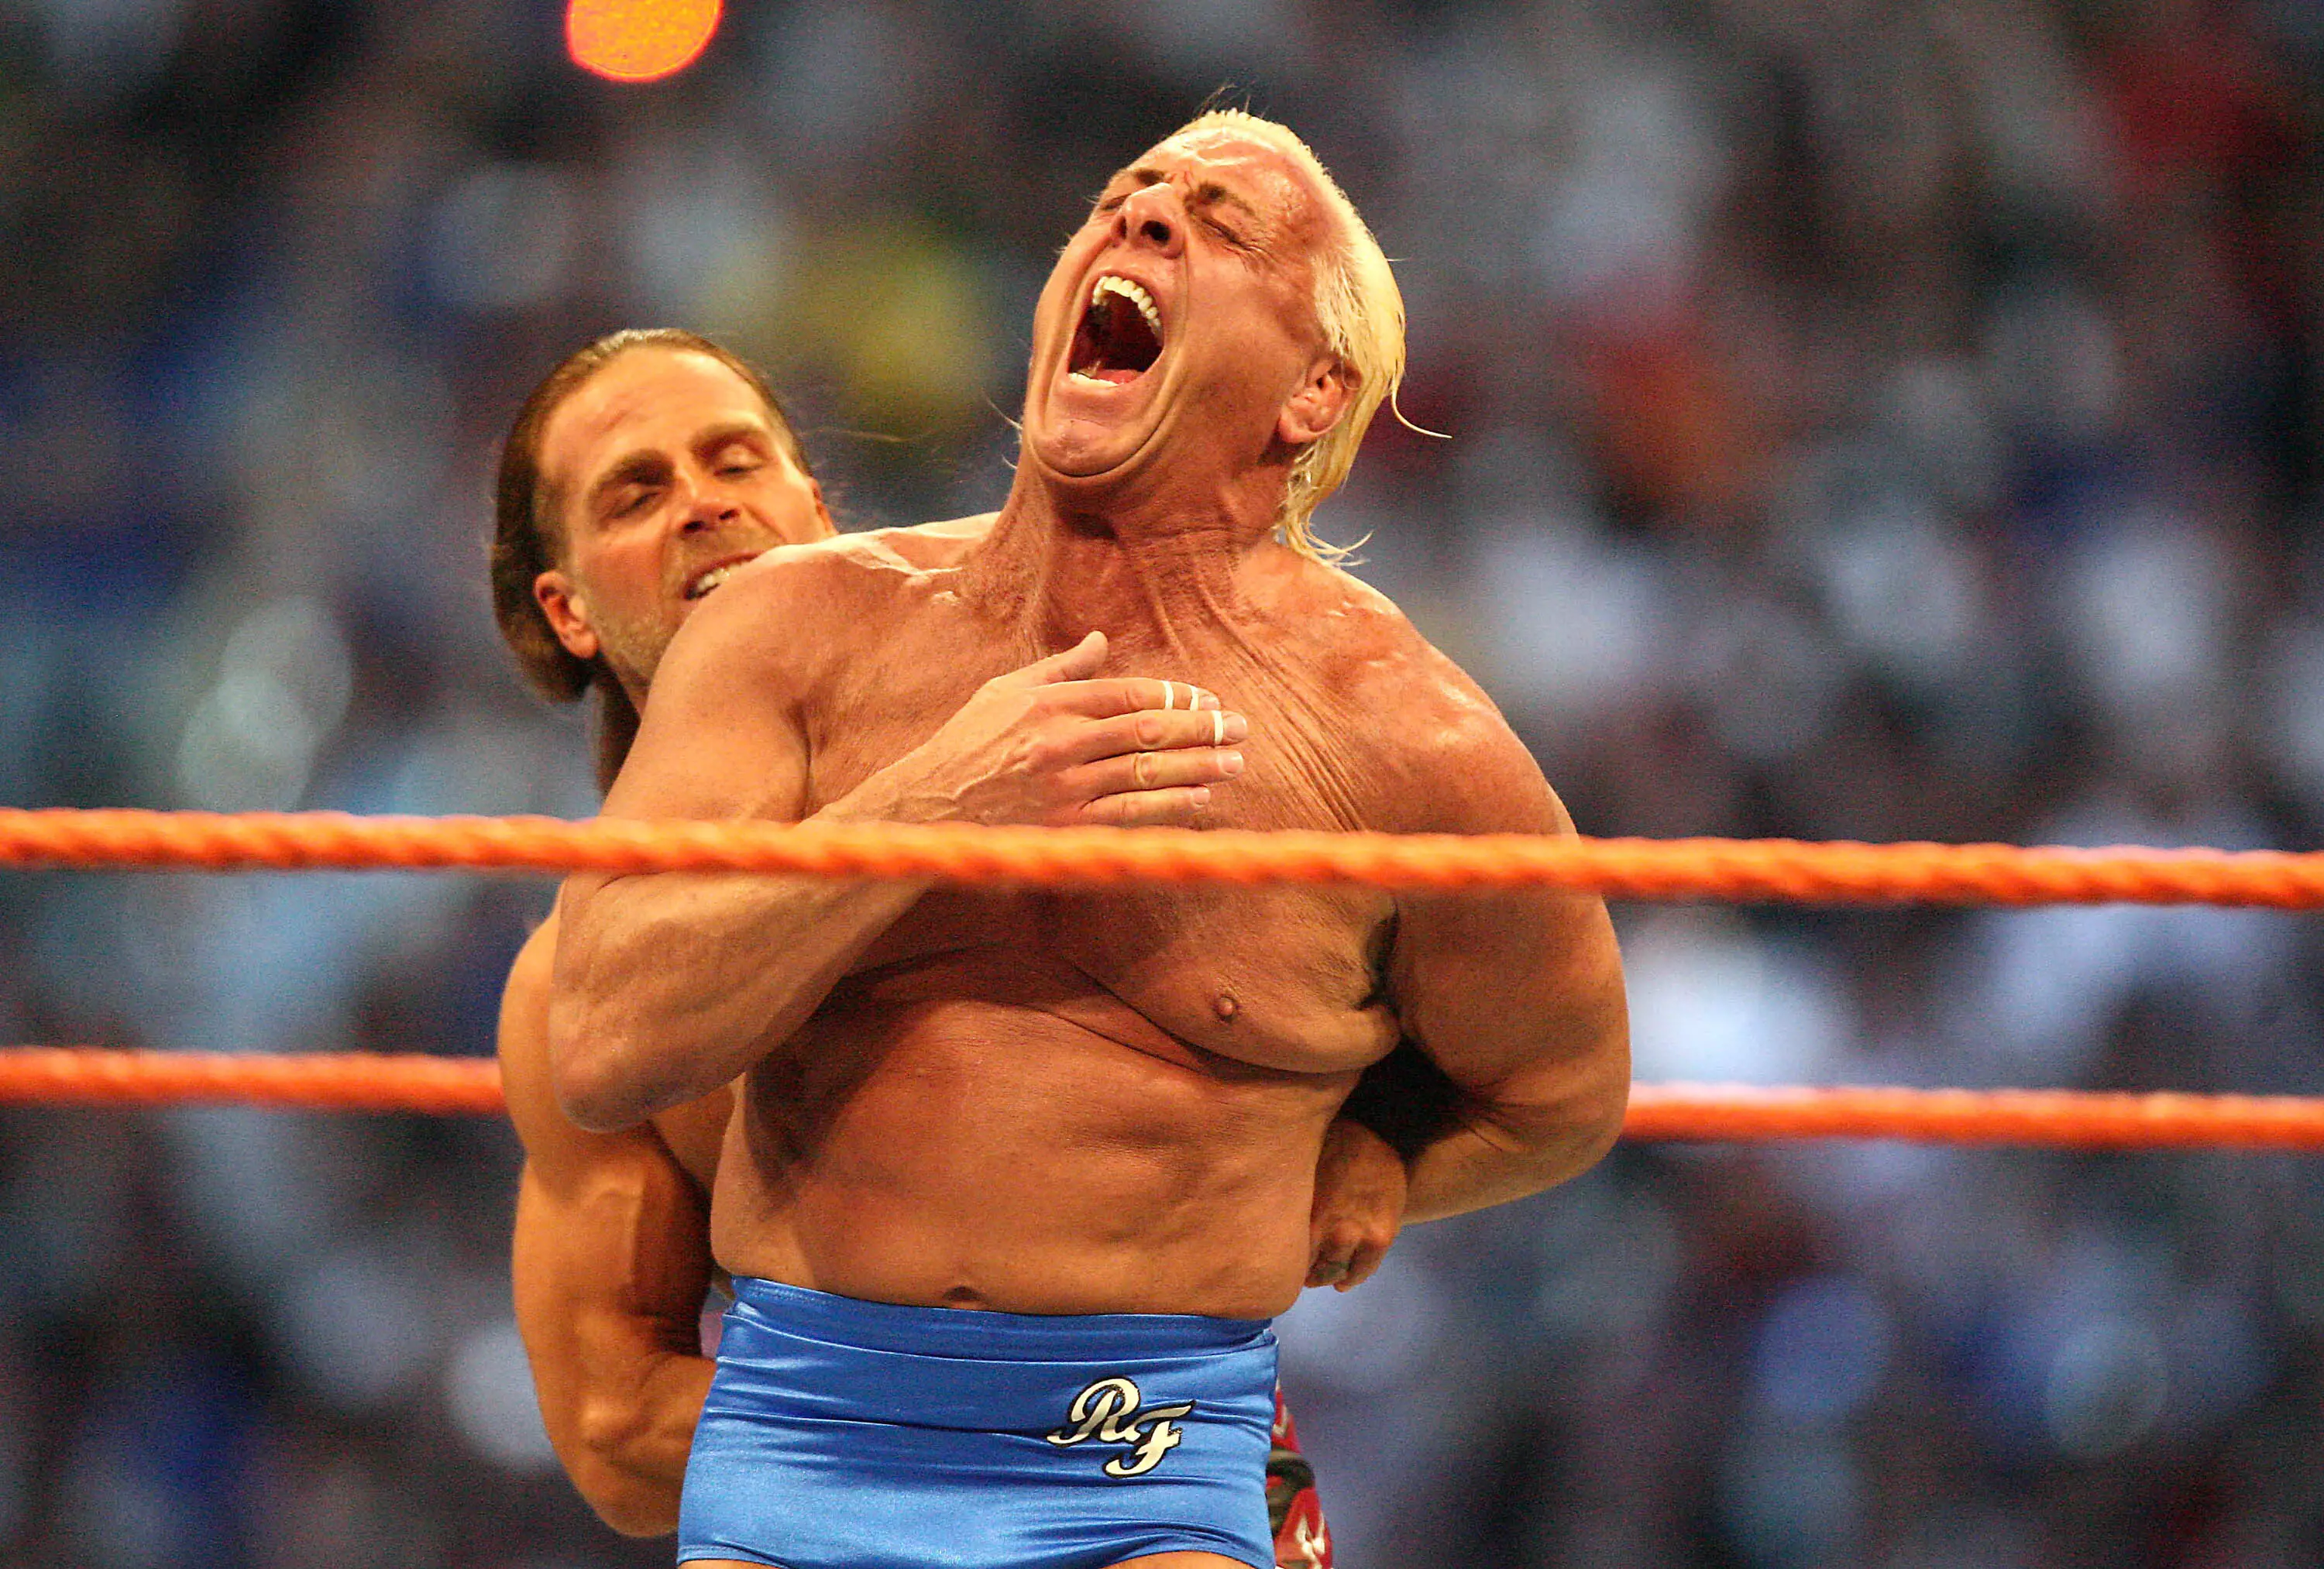 Flair was accused of sexual assault.